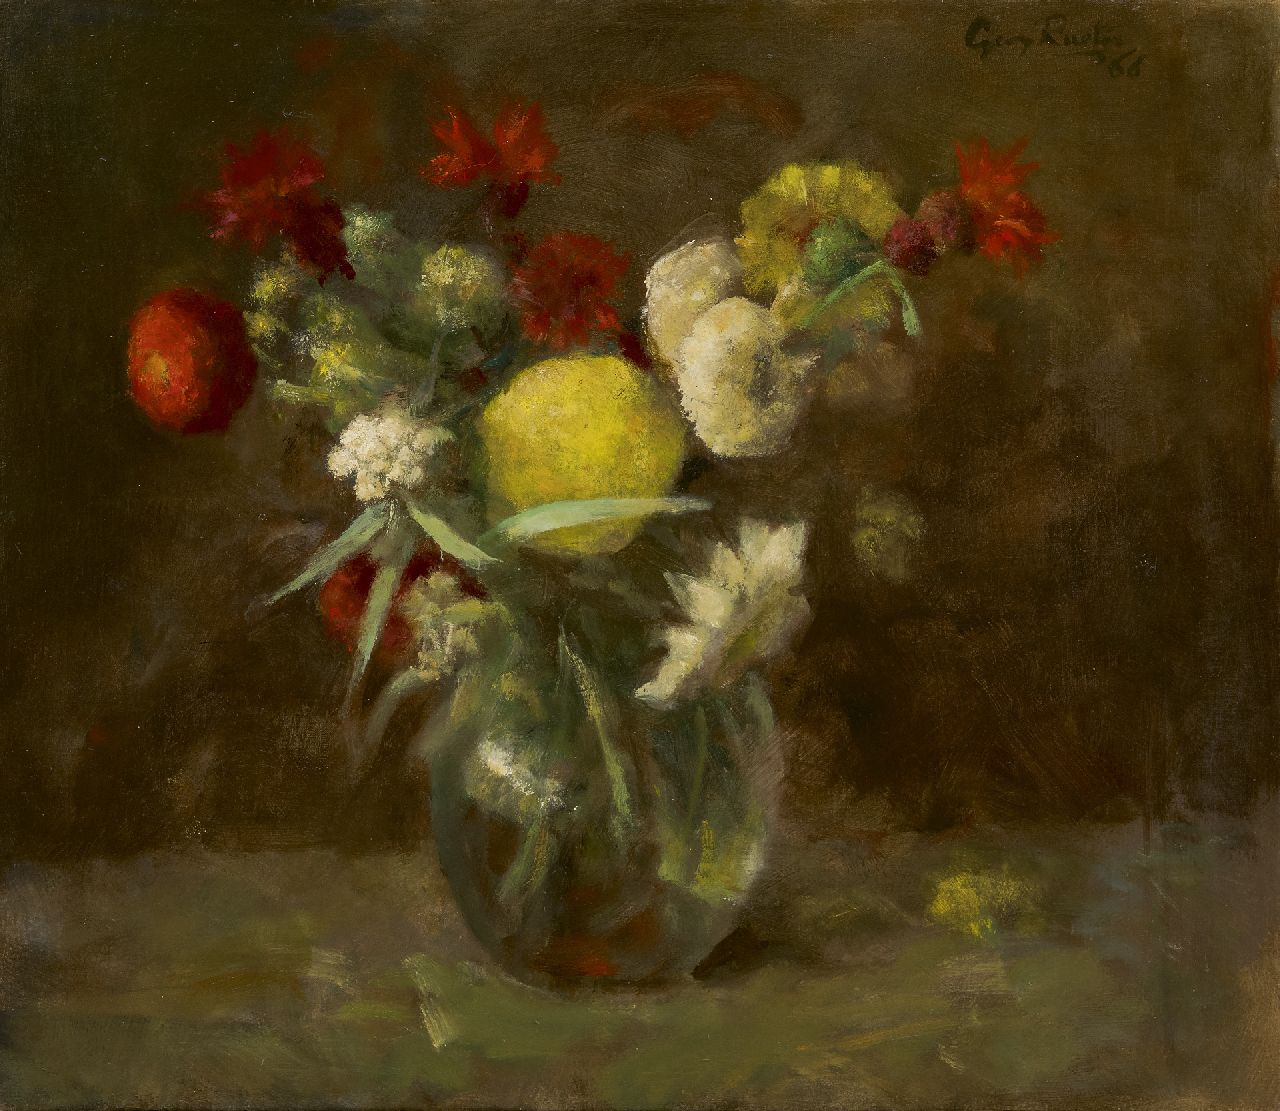 Rueter W.C.G.  | Wilhelm Christian 'Georg' Rueter | Paintings offered for sale | Flowers in a glass vase, oil on canvas 39.8 x 45.0 cm, signed u.r. and dated '66